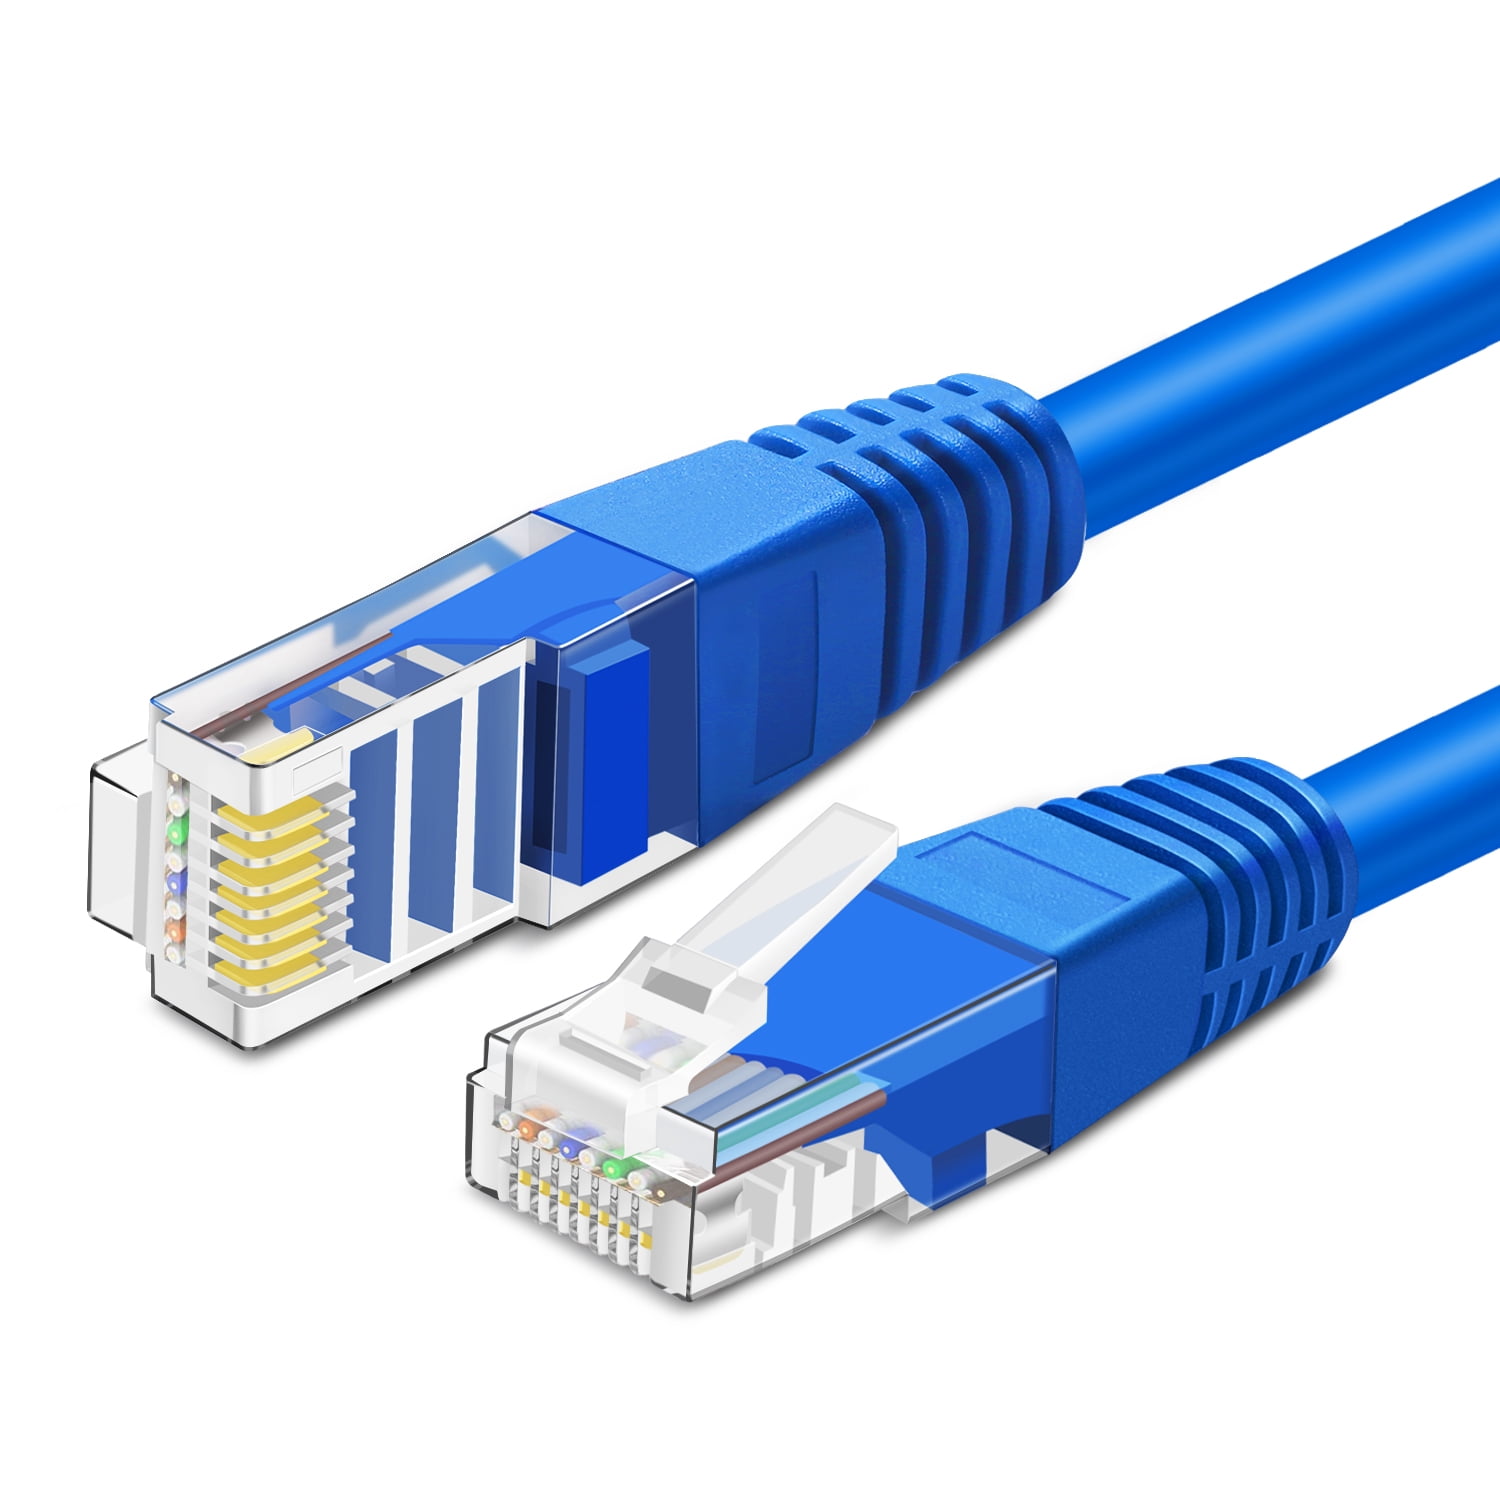 Cat 5e Ethernet Cable 25ft, Cat 5 Internet Patch Cable Cat5e Cable Connector LAN Network Cable Cat5 Wire Cord Snagless Computer Ether Wire (25 Foot Blue) - Walmart.com